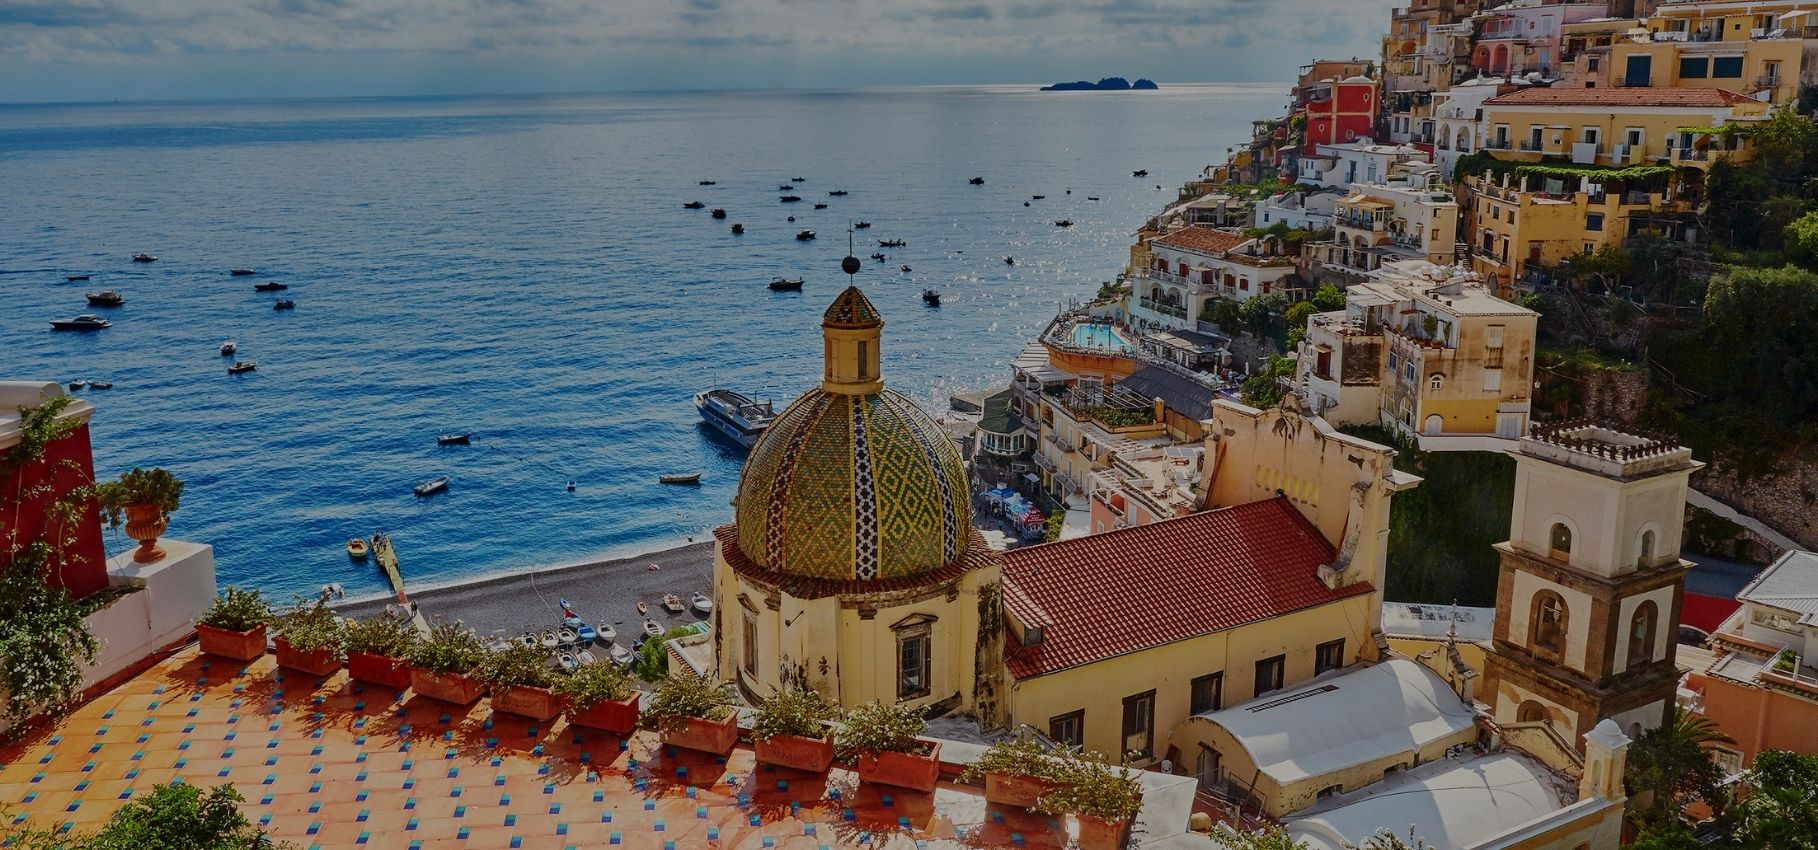 The Best things to do in Amalfi Coast, Italy